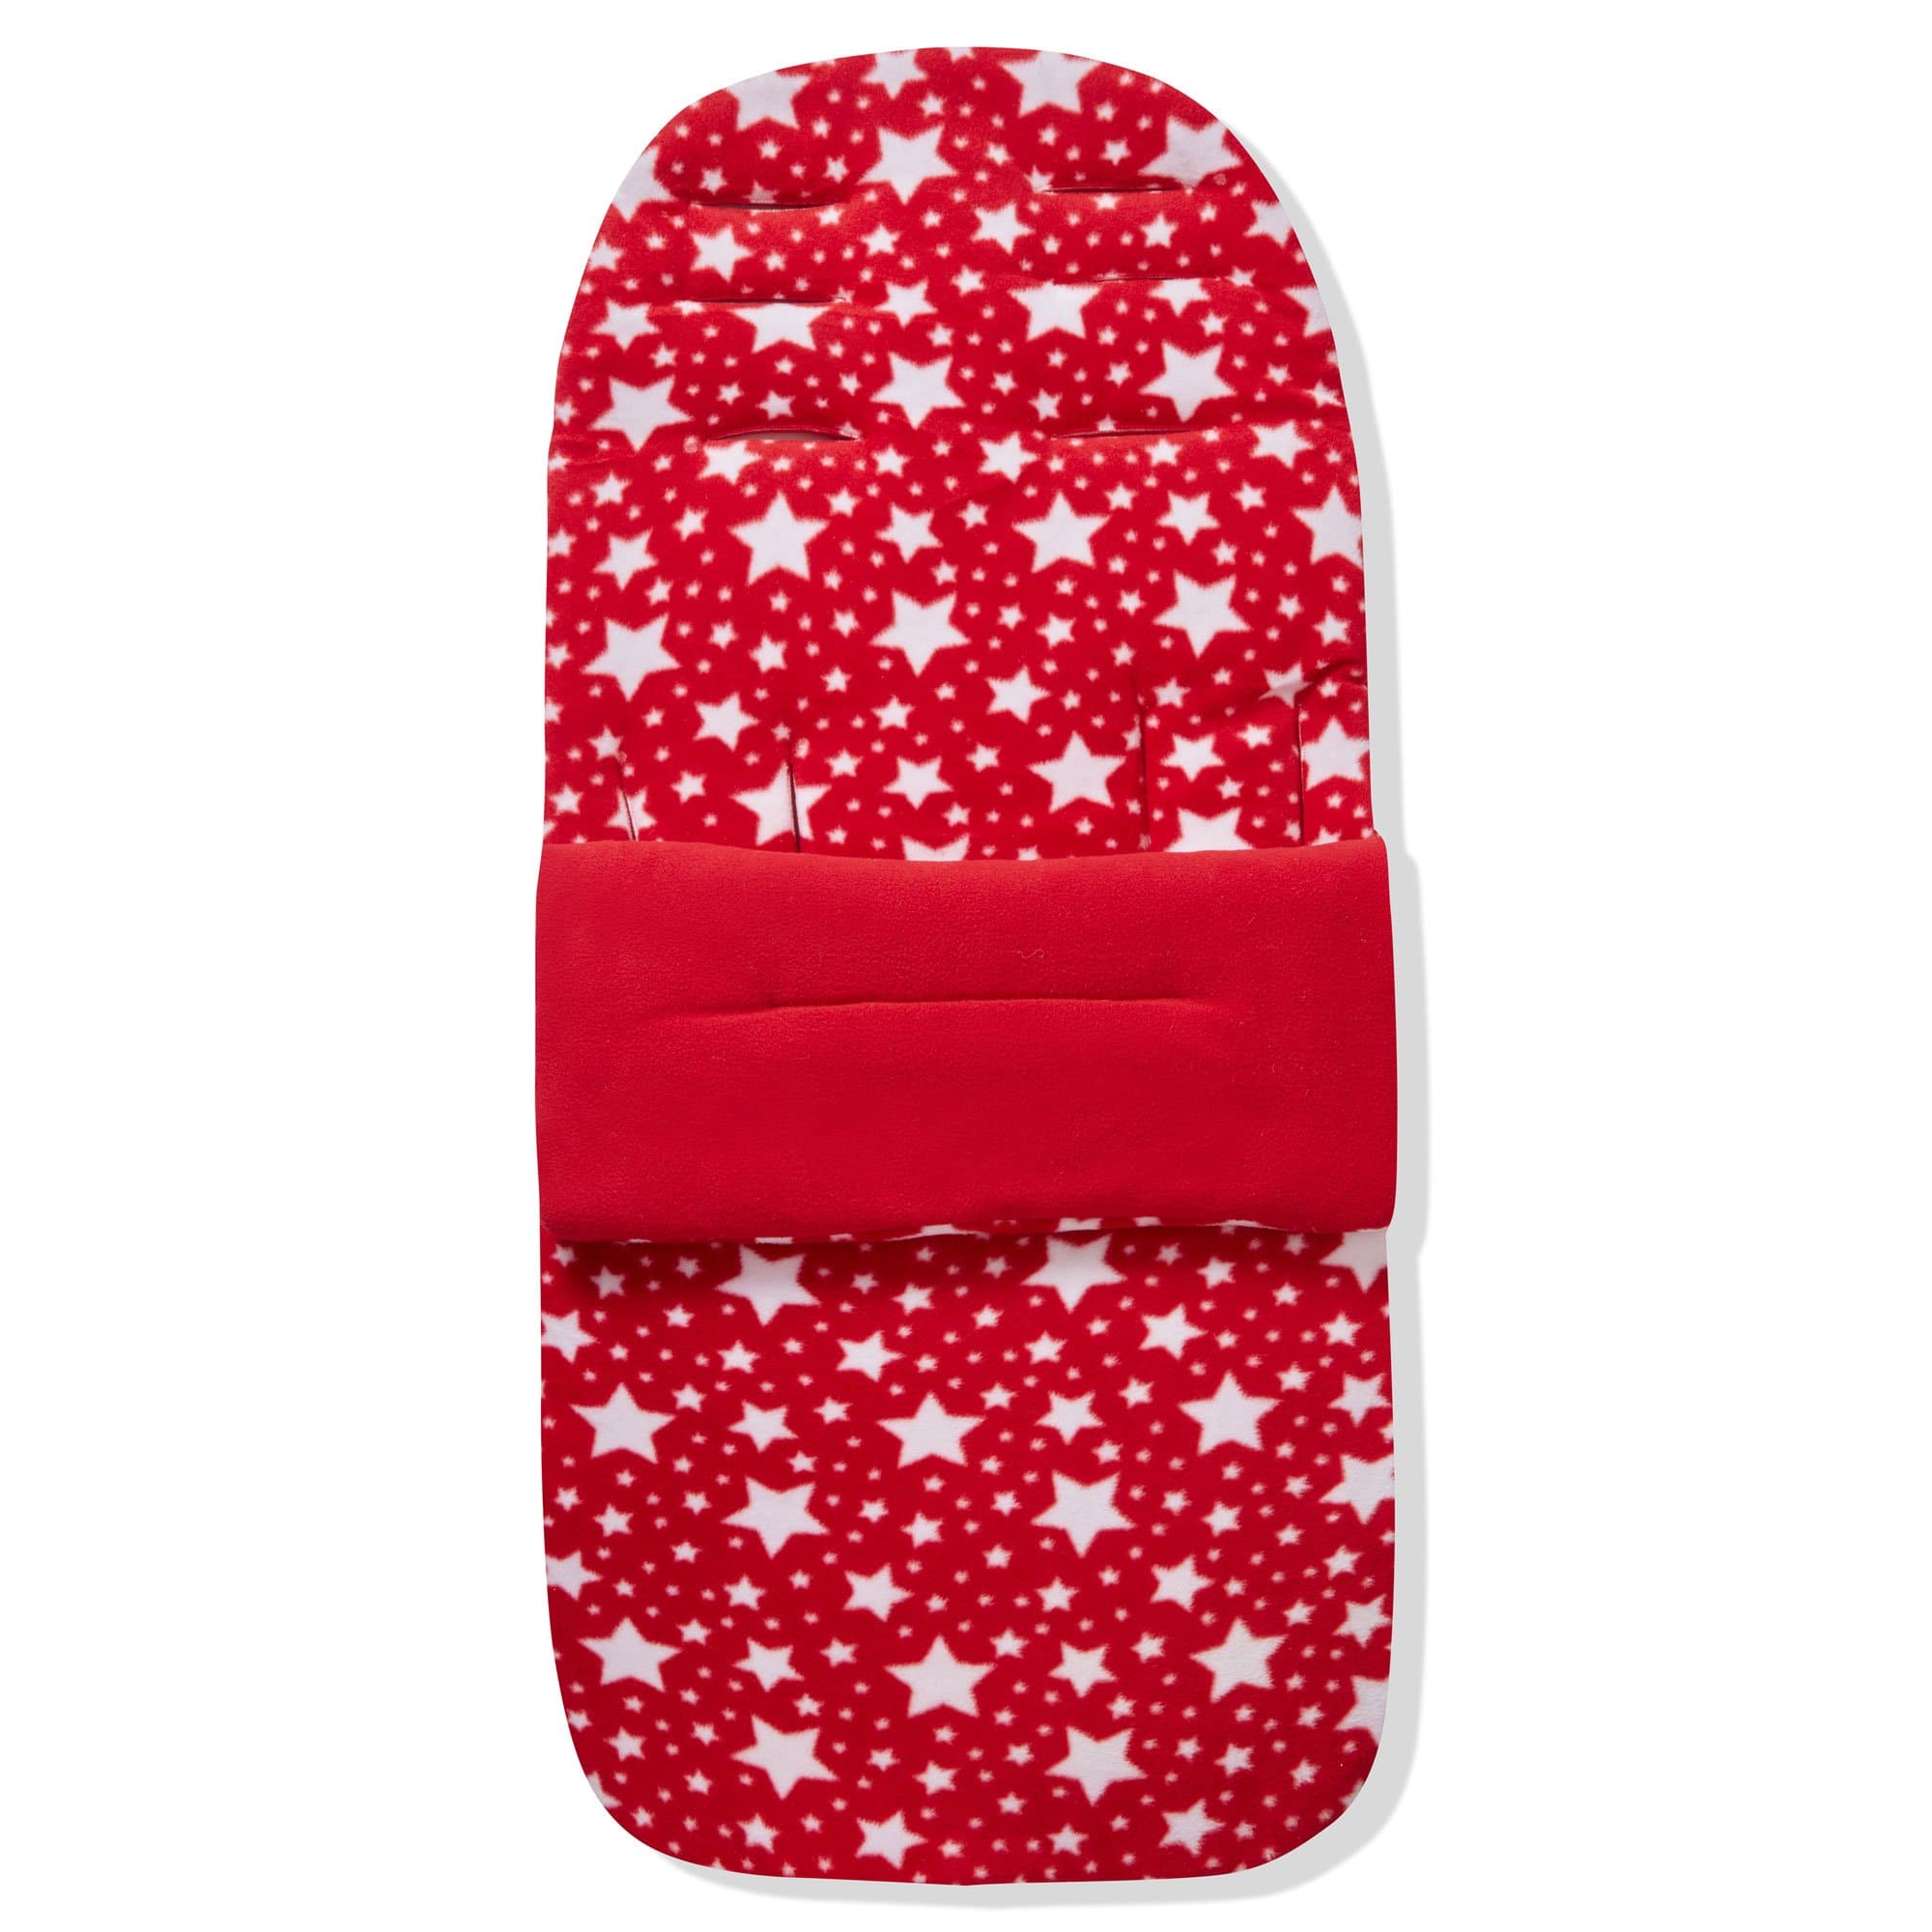 Fleece Footmuff / Cosy Toes Compatible with Nuna - Red Star / Fits All Models | For Your Little One